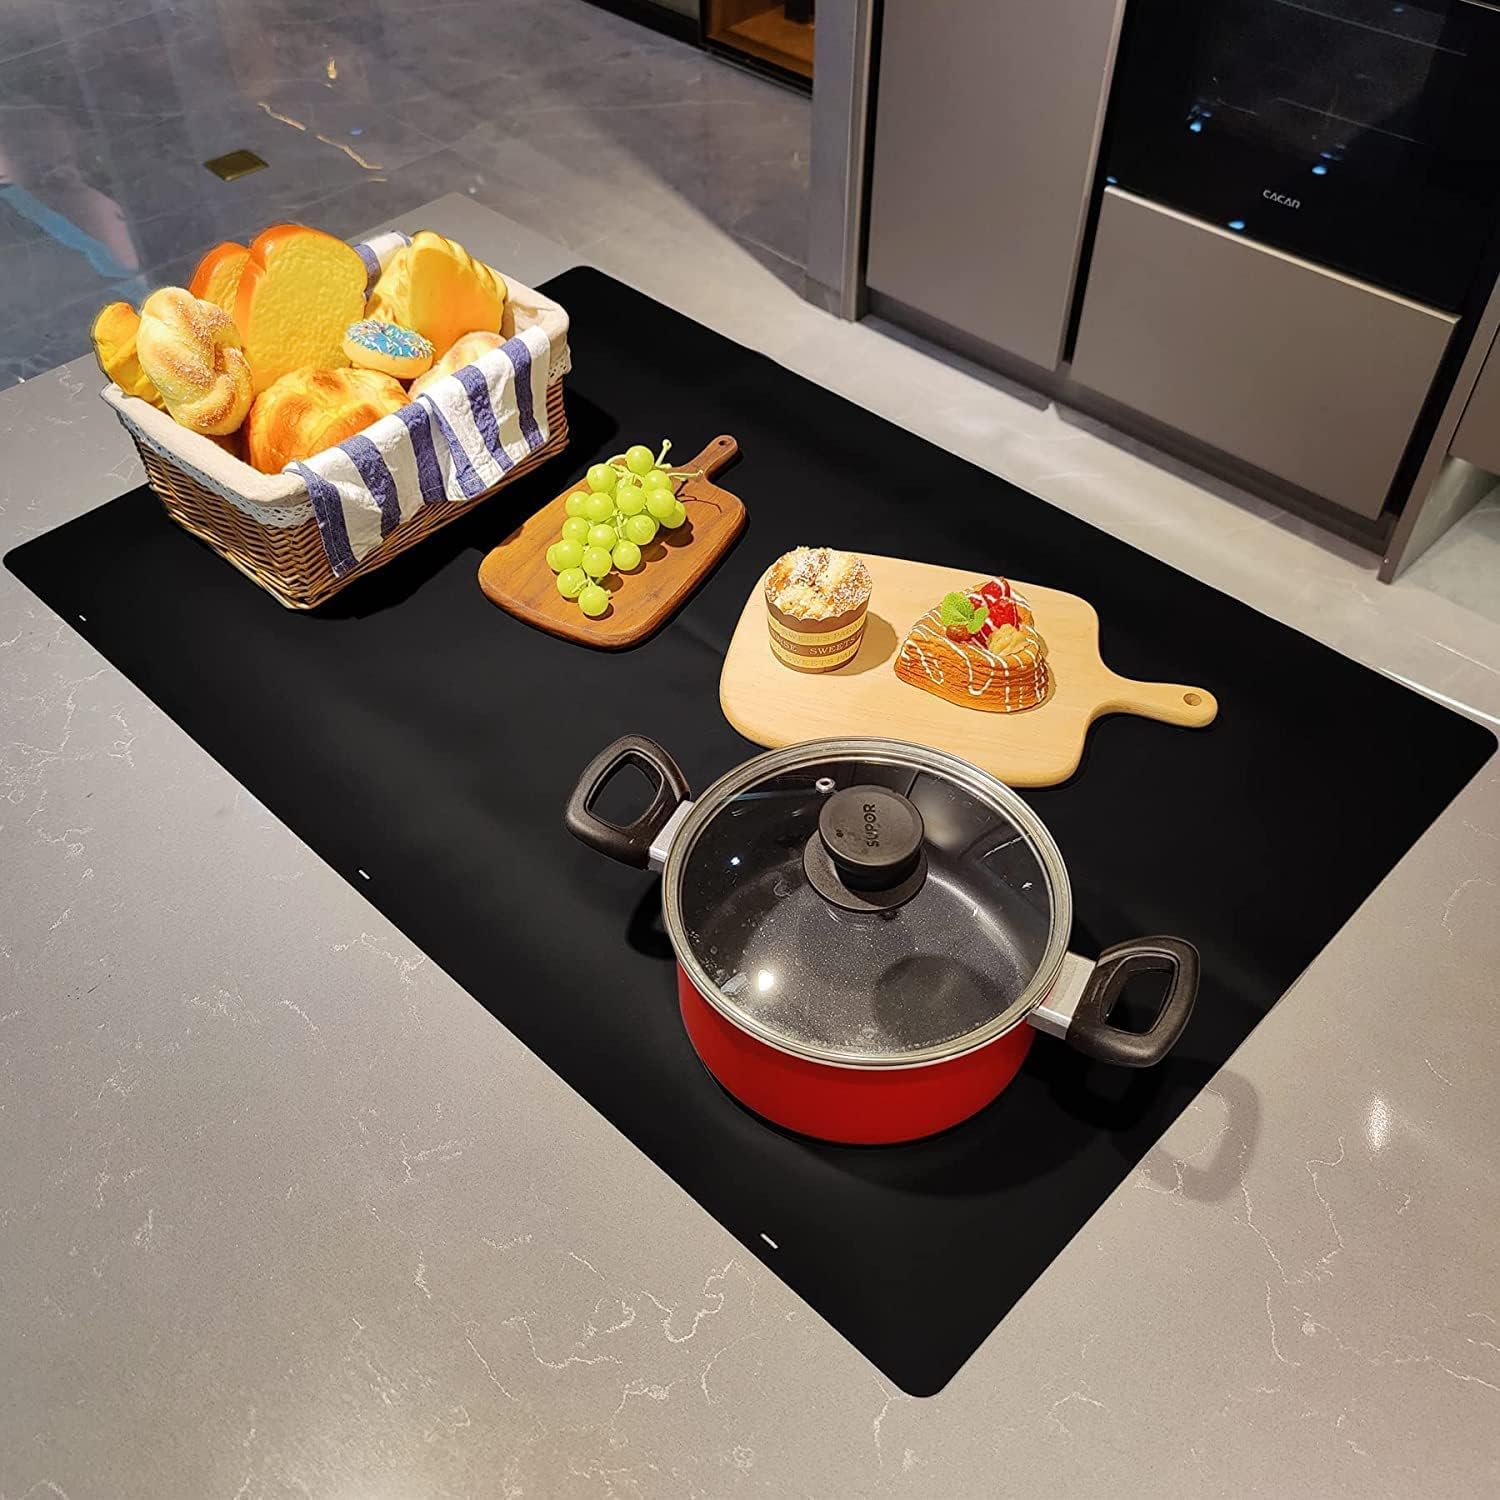 SENGBIRCH Large Induction Hob Protector Mat, 54x90cm - Silicone Induction Protective Cover for Gas Cookers - Multifunctional Silicone Mats - Amazing Gadgets Outlet